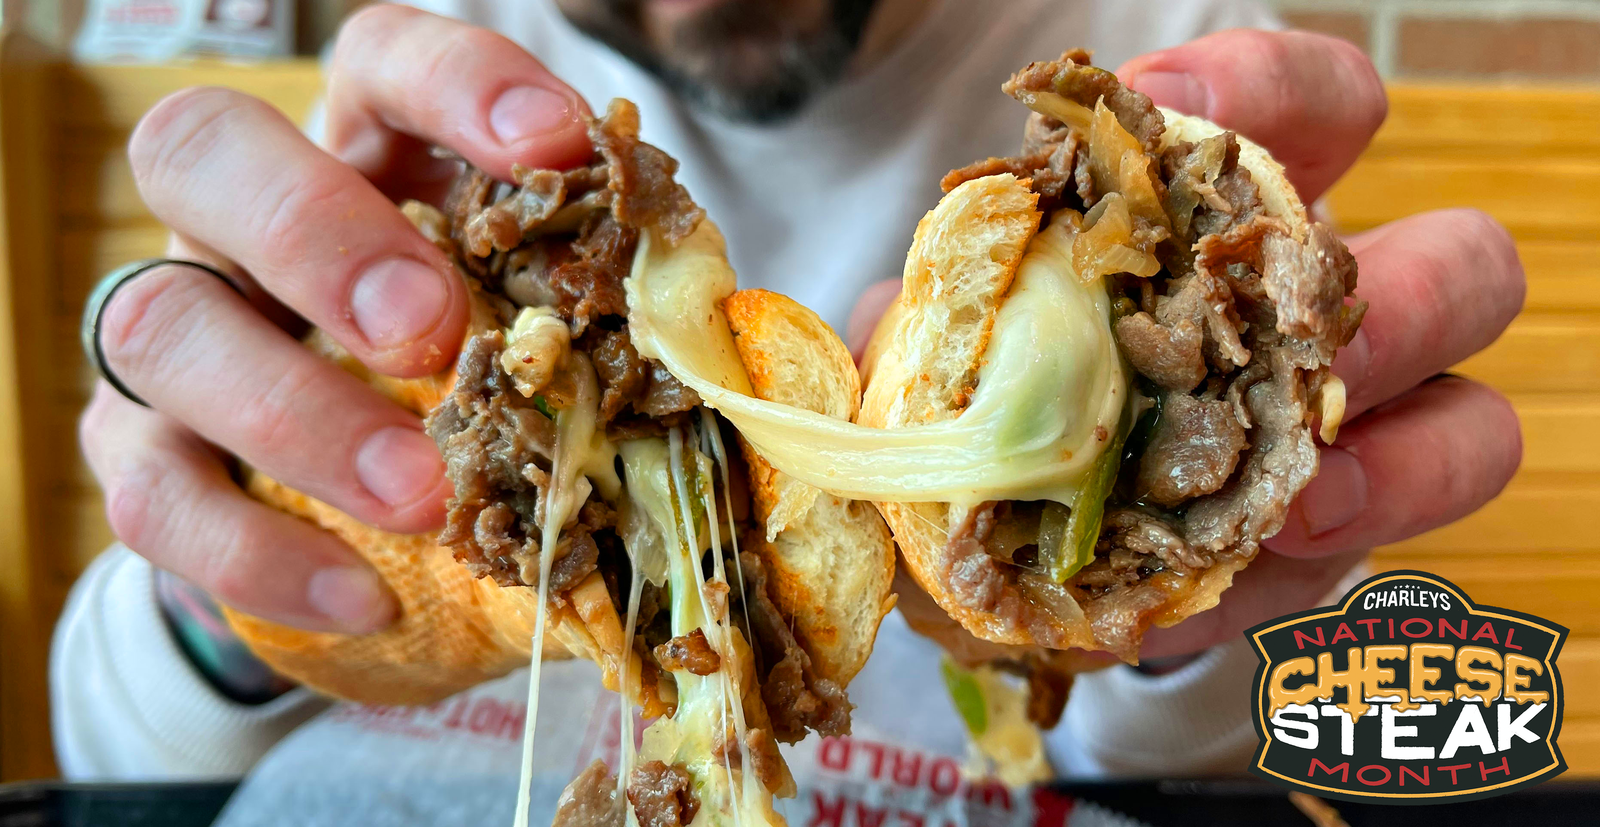 A person holding a cheesy cheesesteak from Charleys with a logo in the corner that says National Cheesesteak Month.